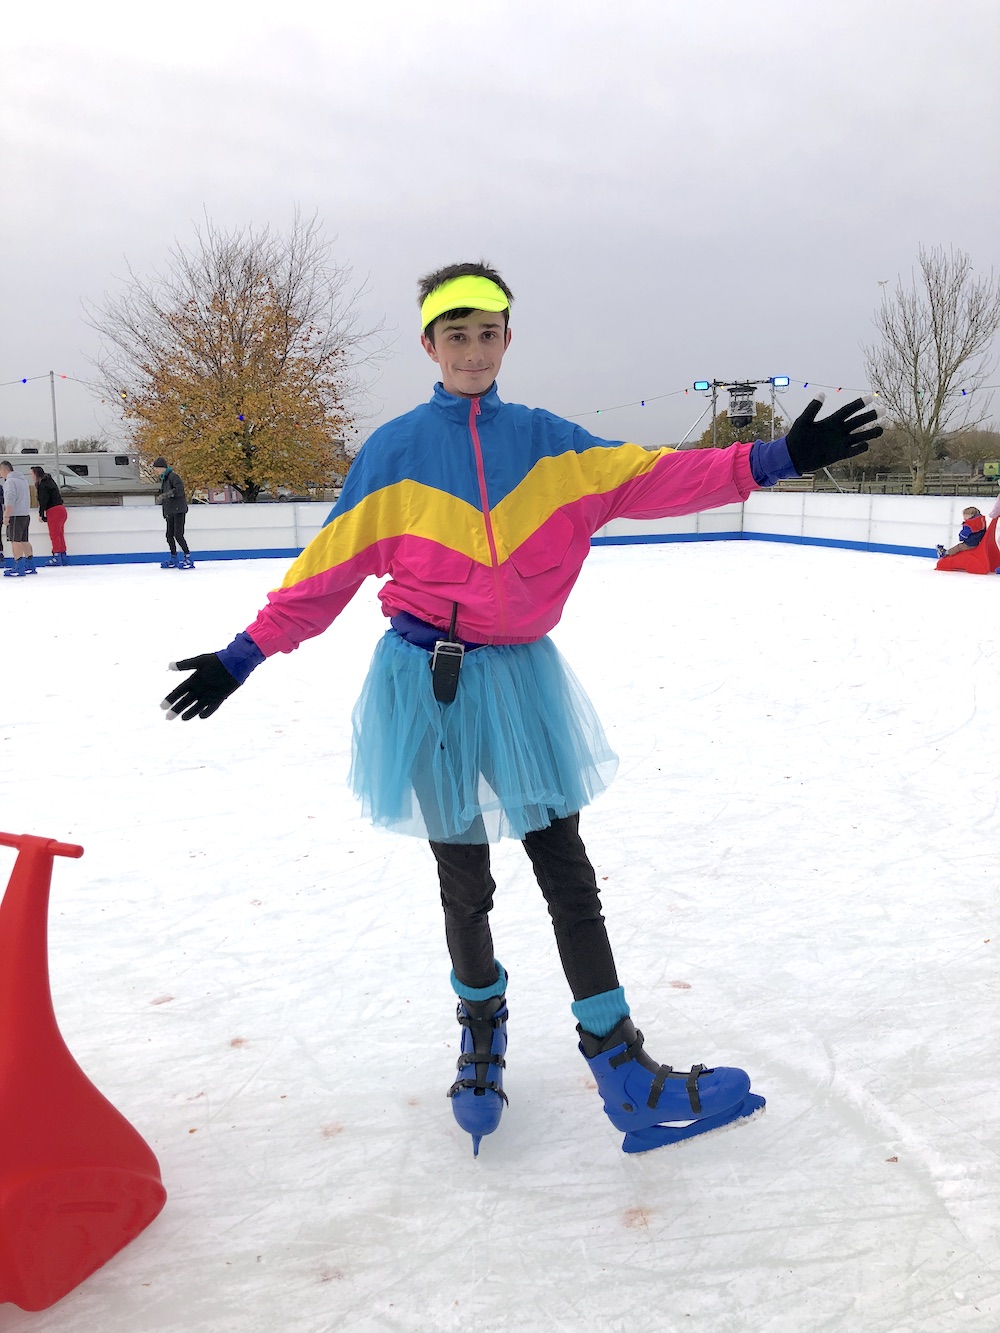 Man sporting fluorescent eighties clothing and a blue tutu at the Outdoor Festive Ice Skating Rink at Avon Valley Park in Bristol